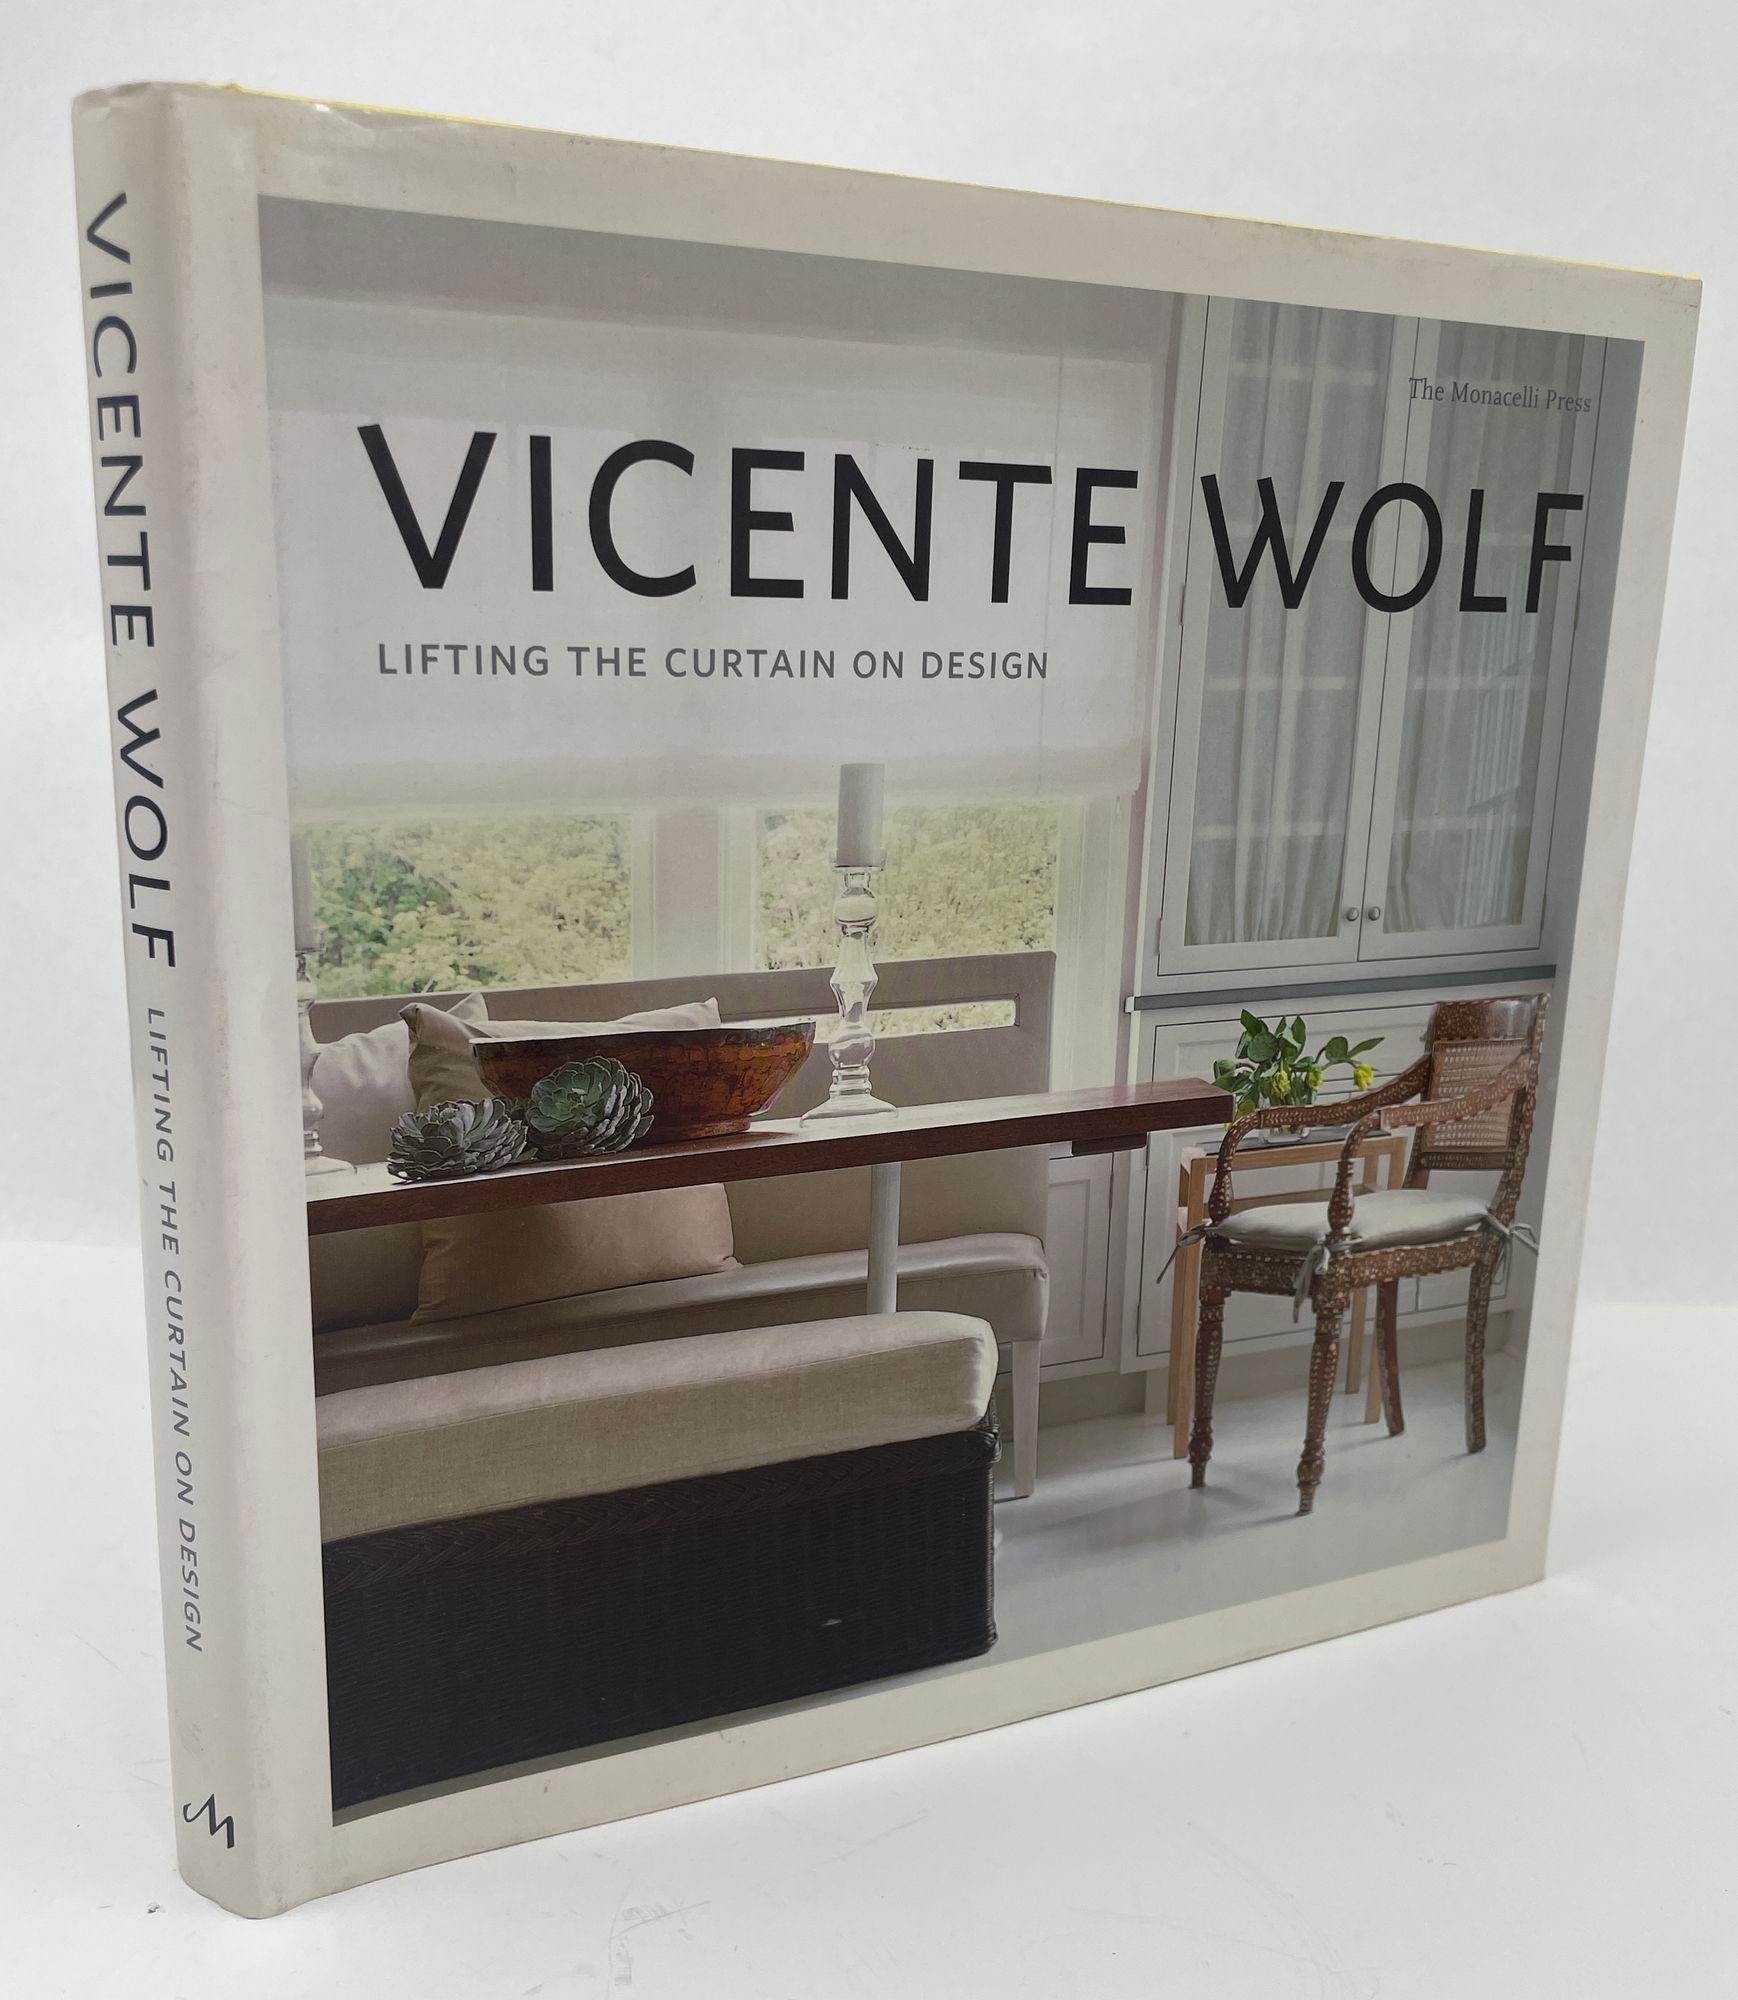 Lifting the Curtain on Design Hardcover 2010 by Vicente Wolf For Sale 12